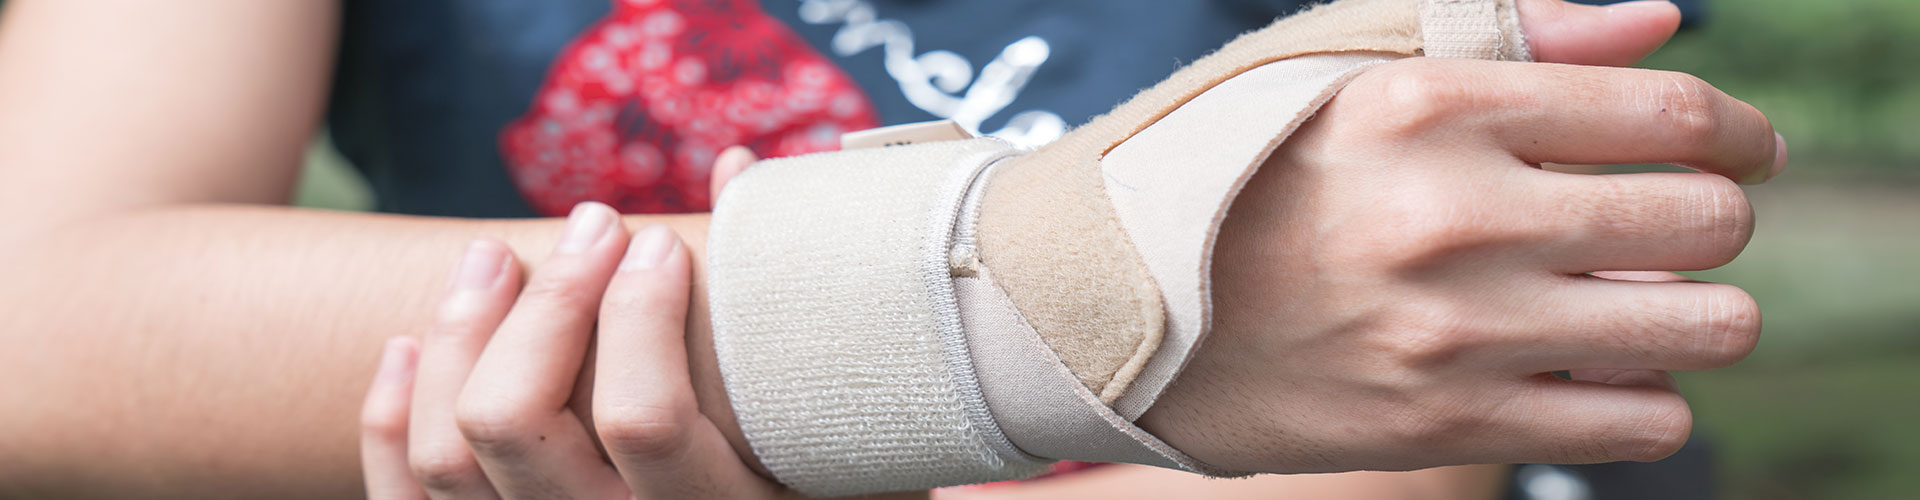 injured woman with wristband compression